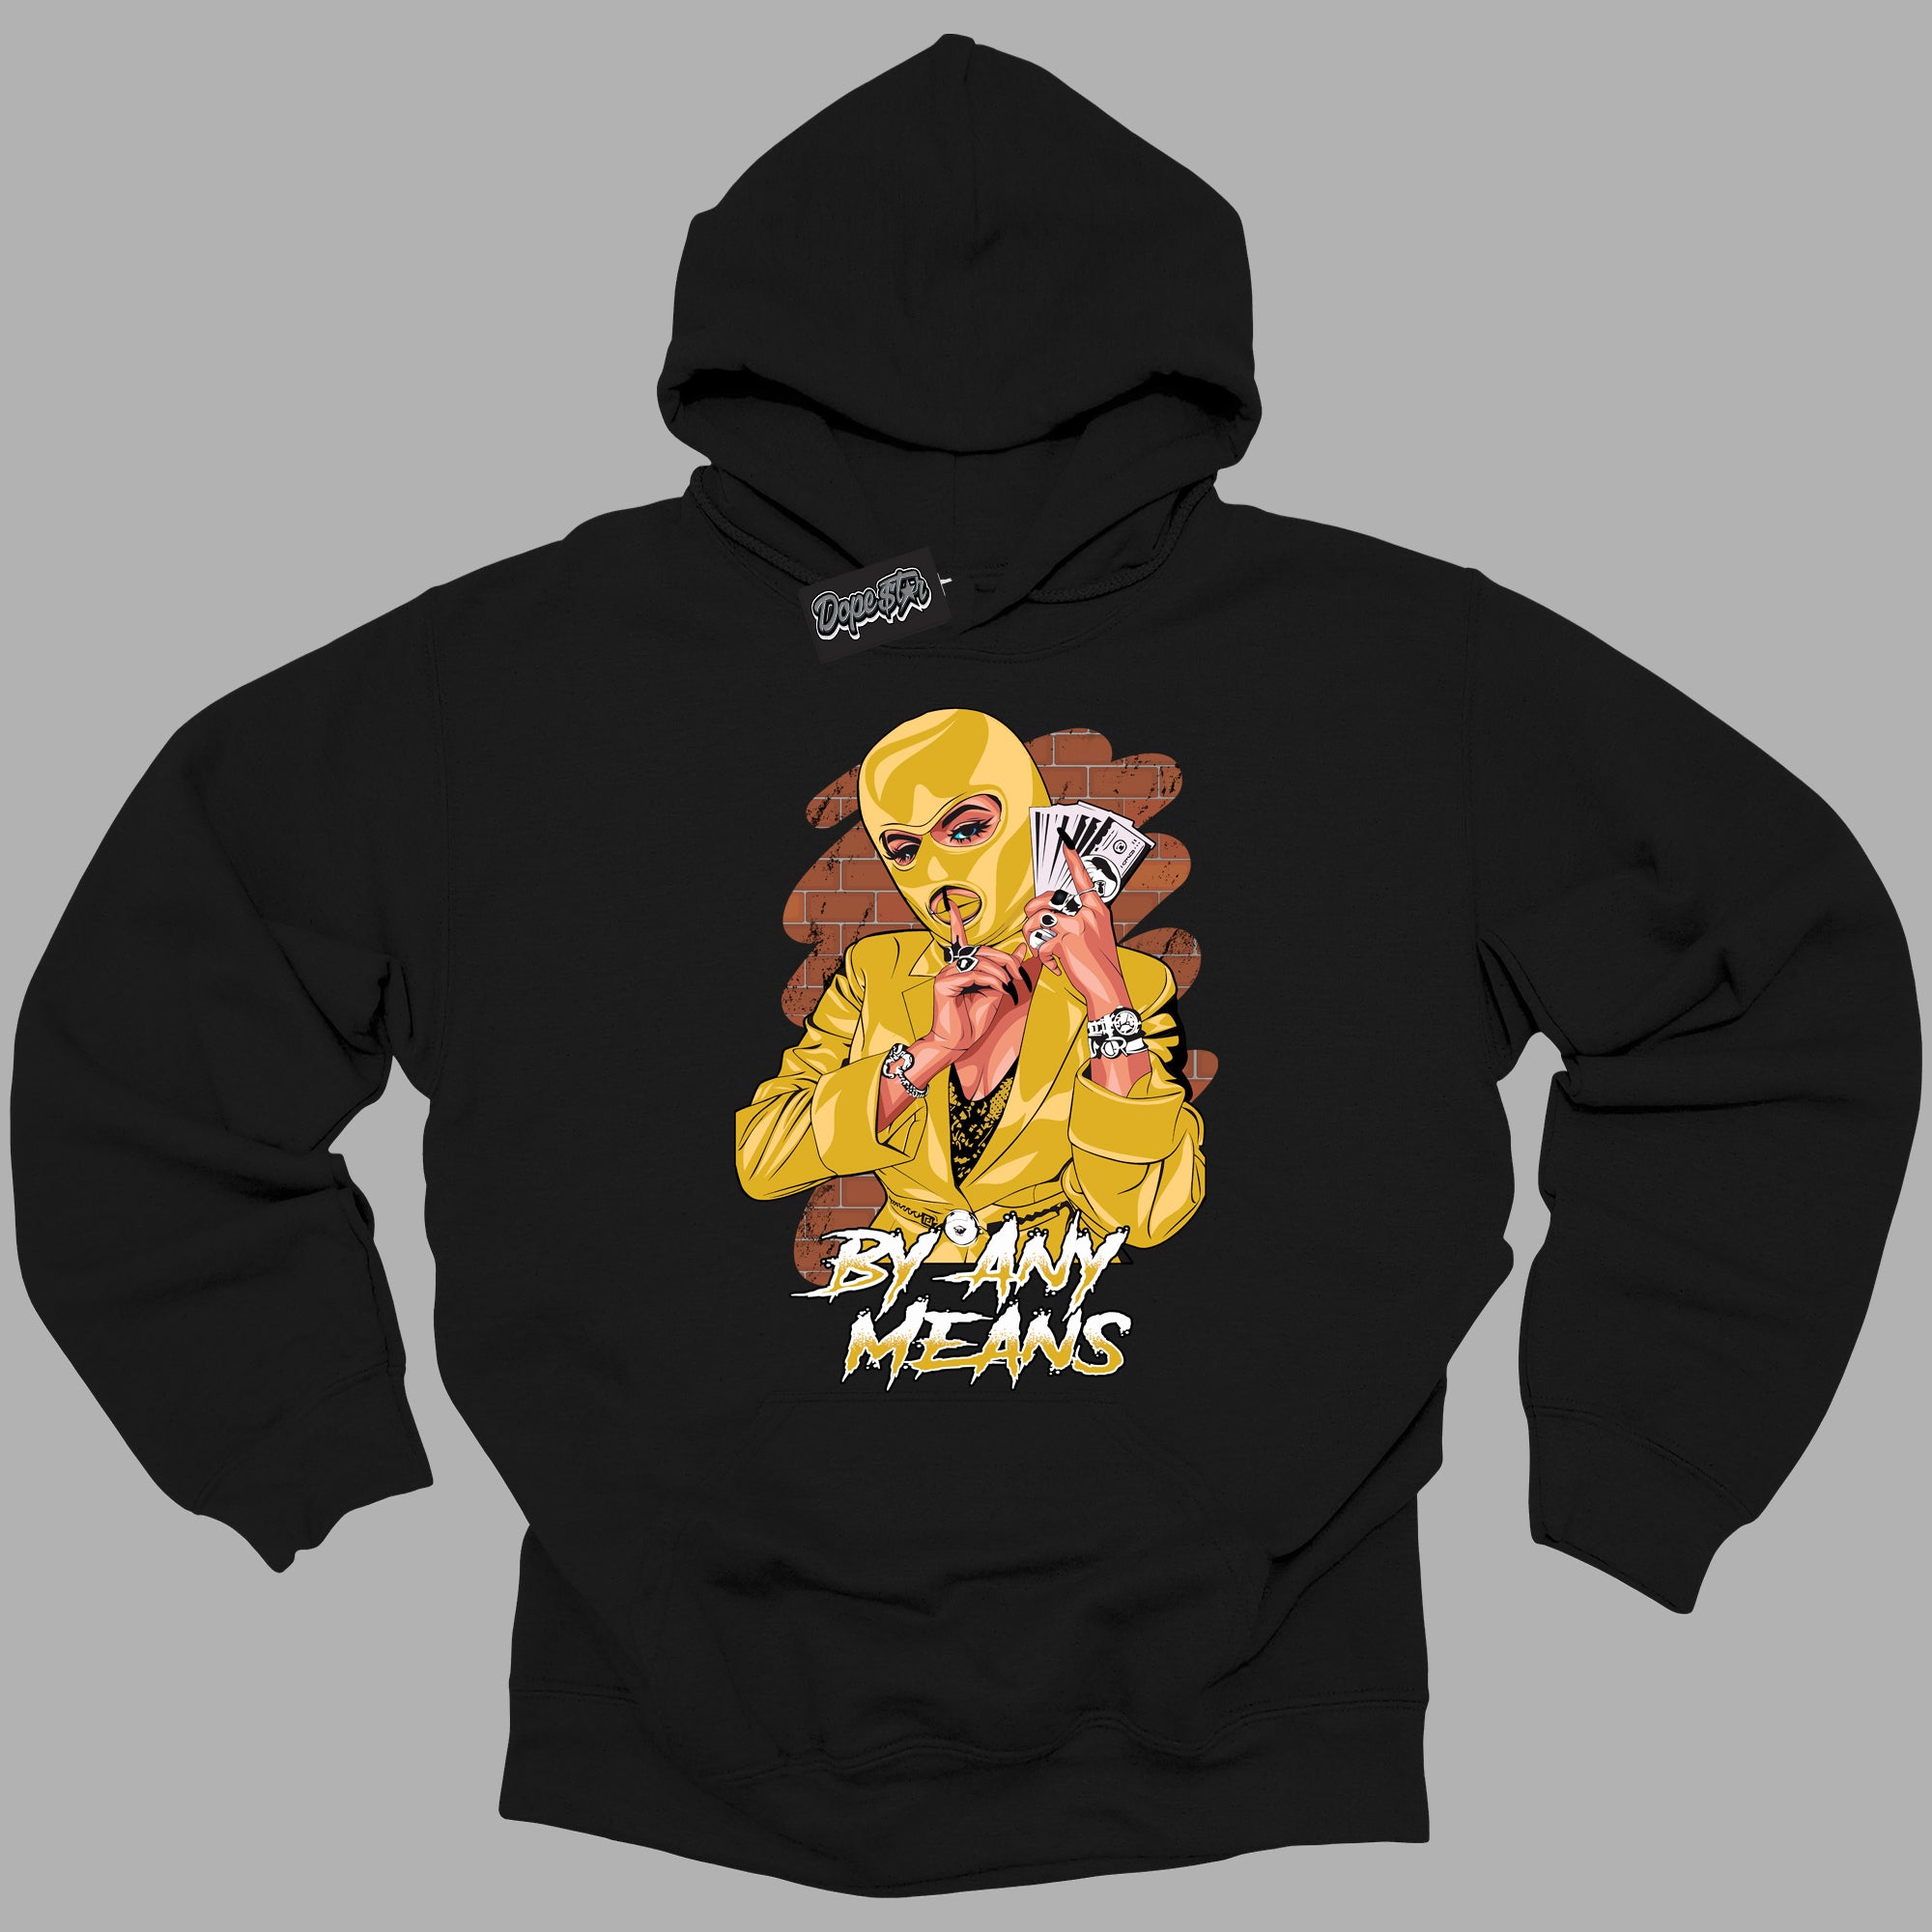 Cool Black Hoodie with “By Any Means ”  design that Perfectly Matches Yellow Ochre 6s Sneakers.